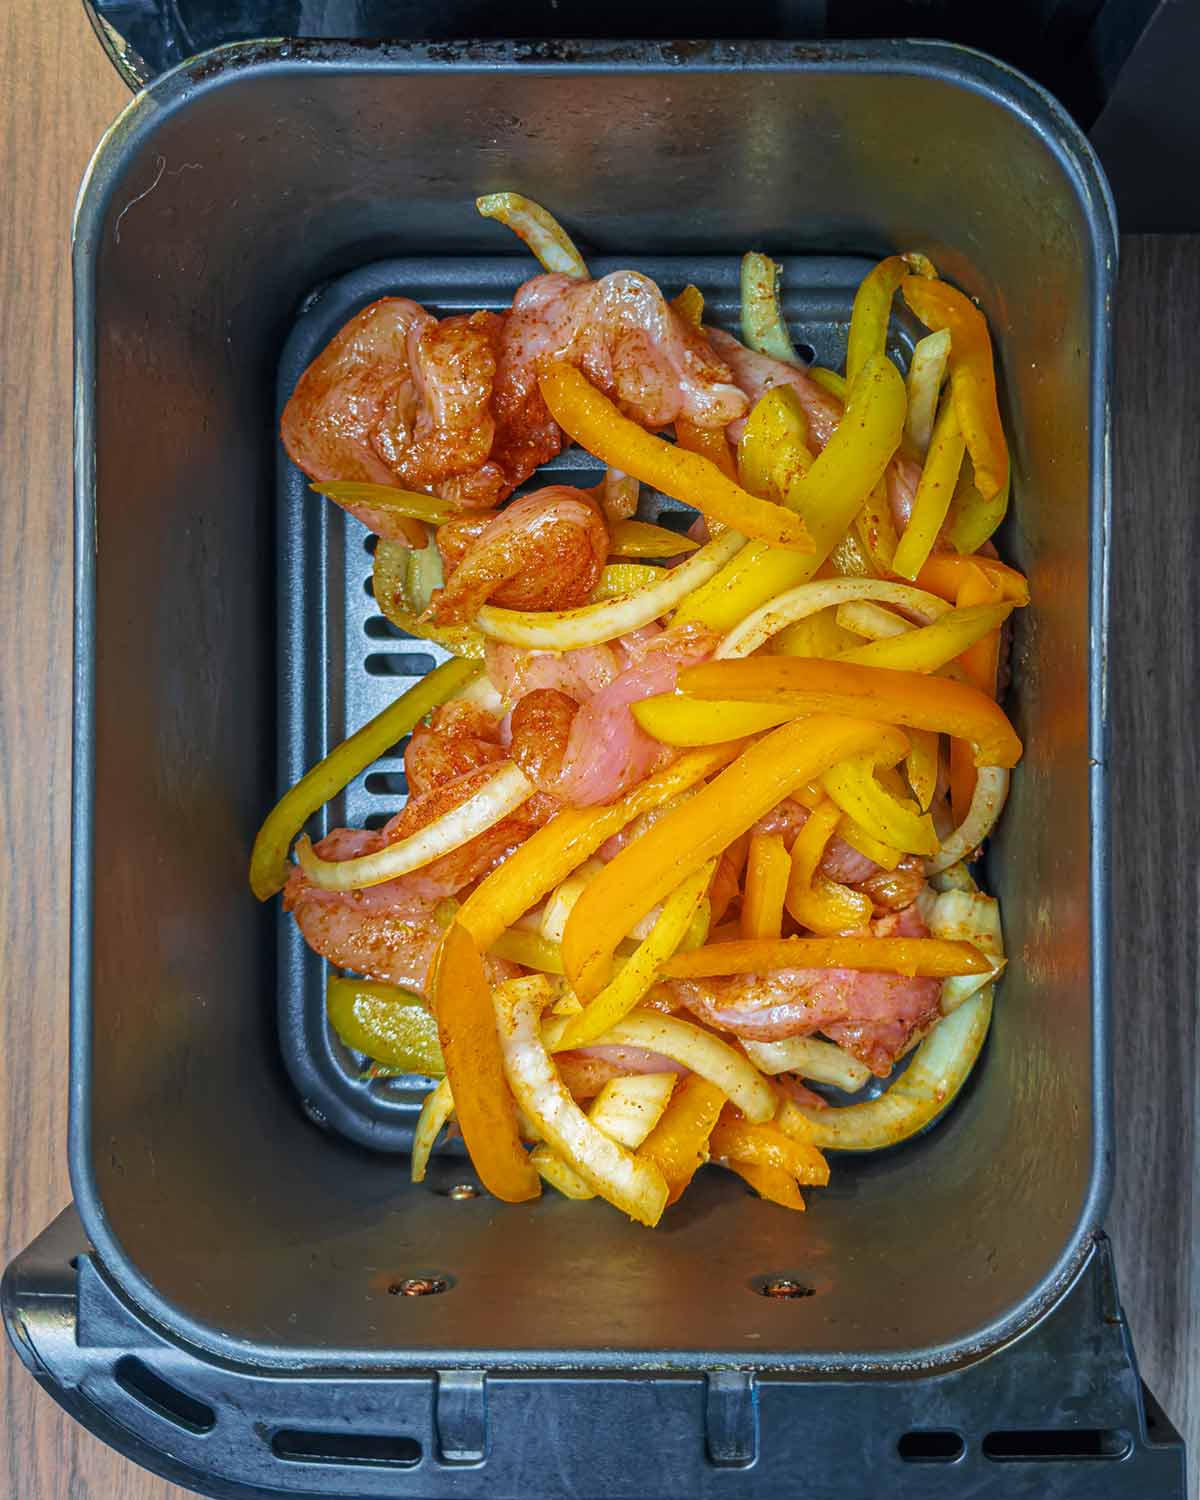 Coated chicken, peppers and onions in an air fryer.